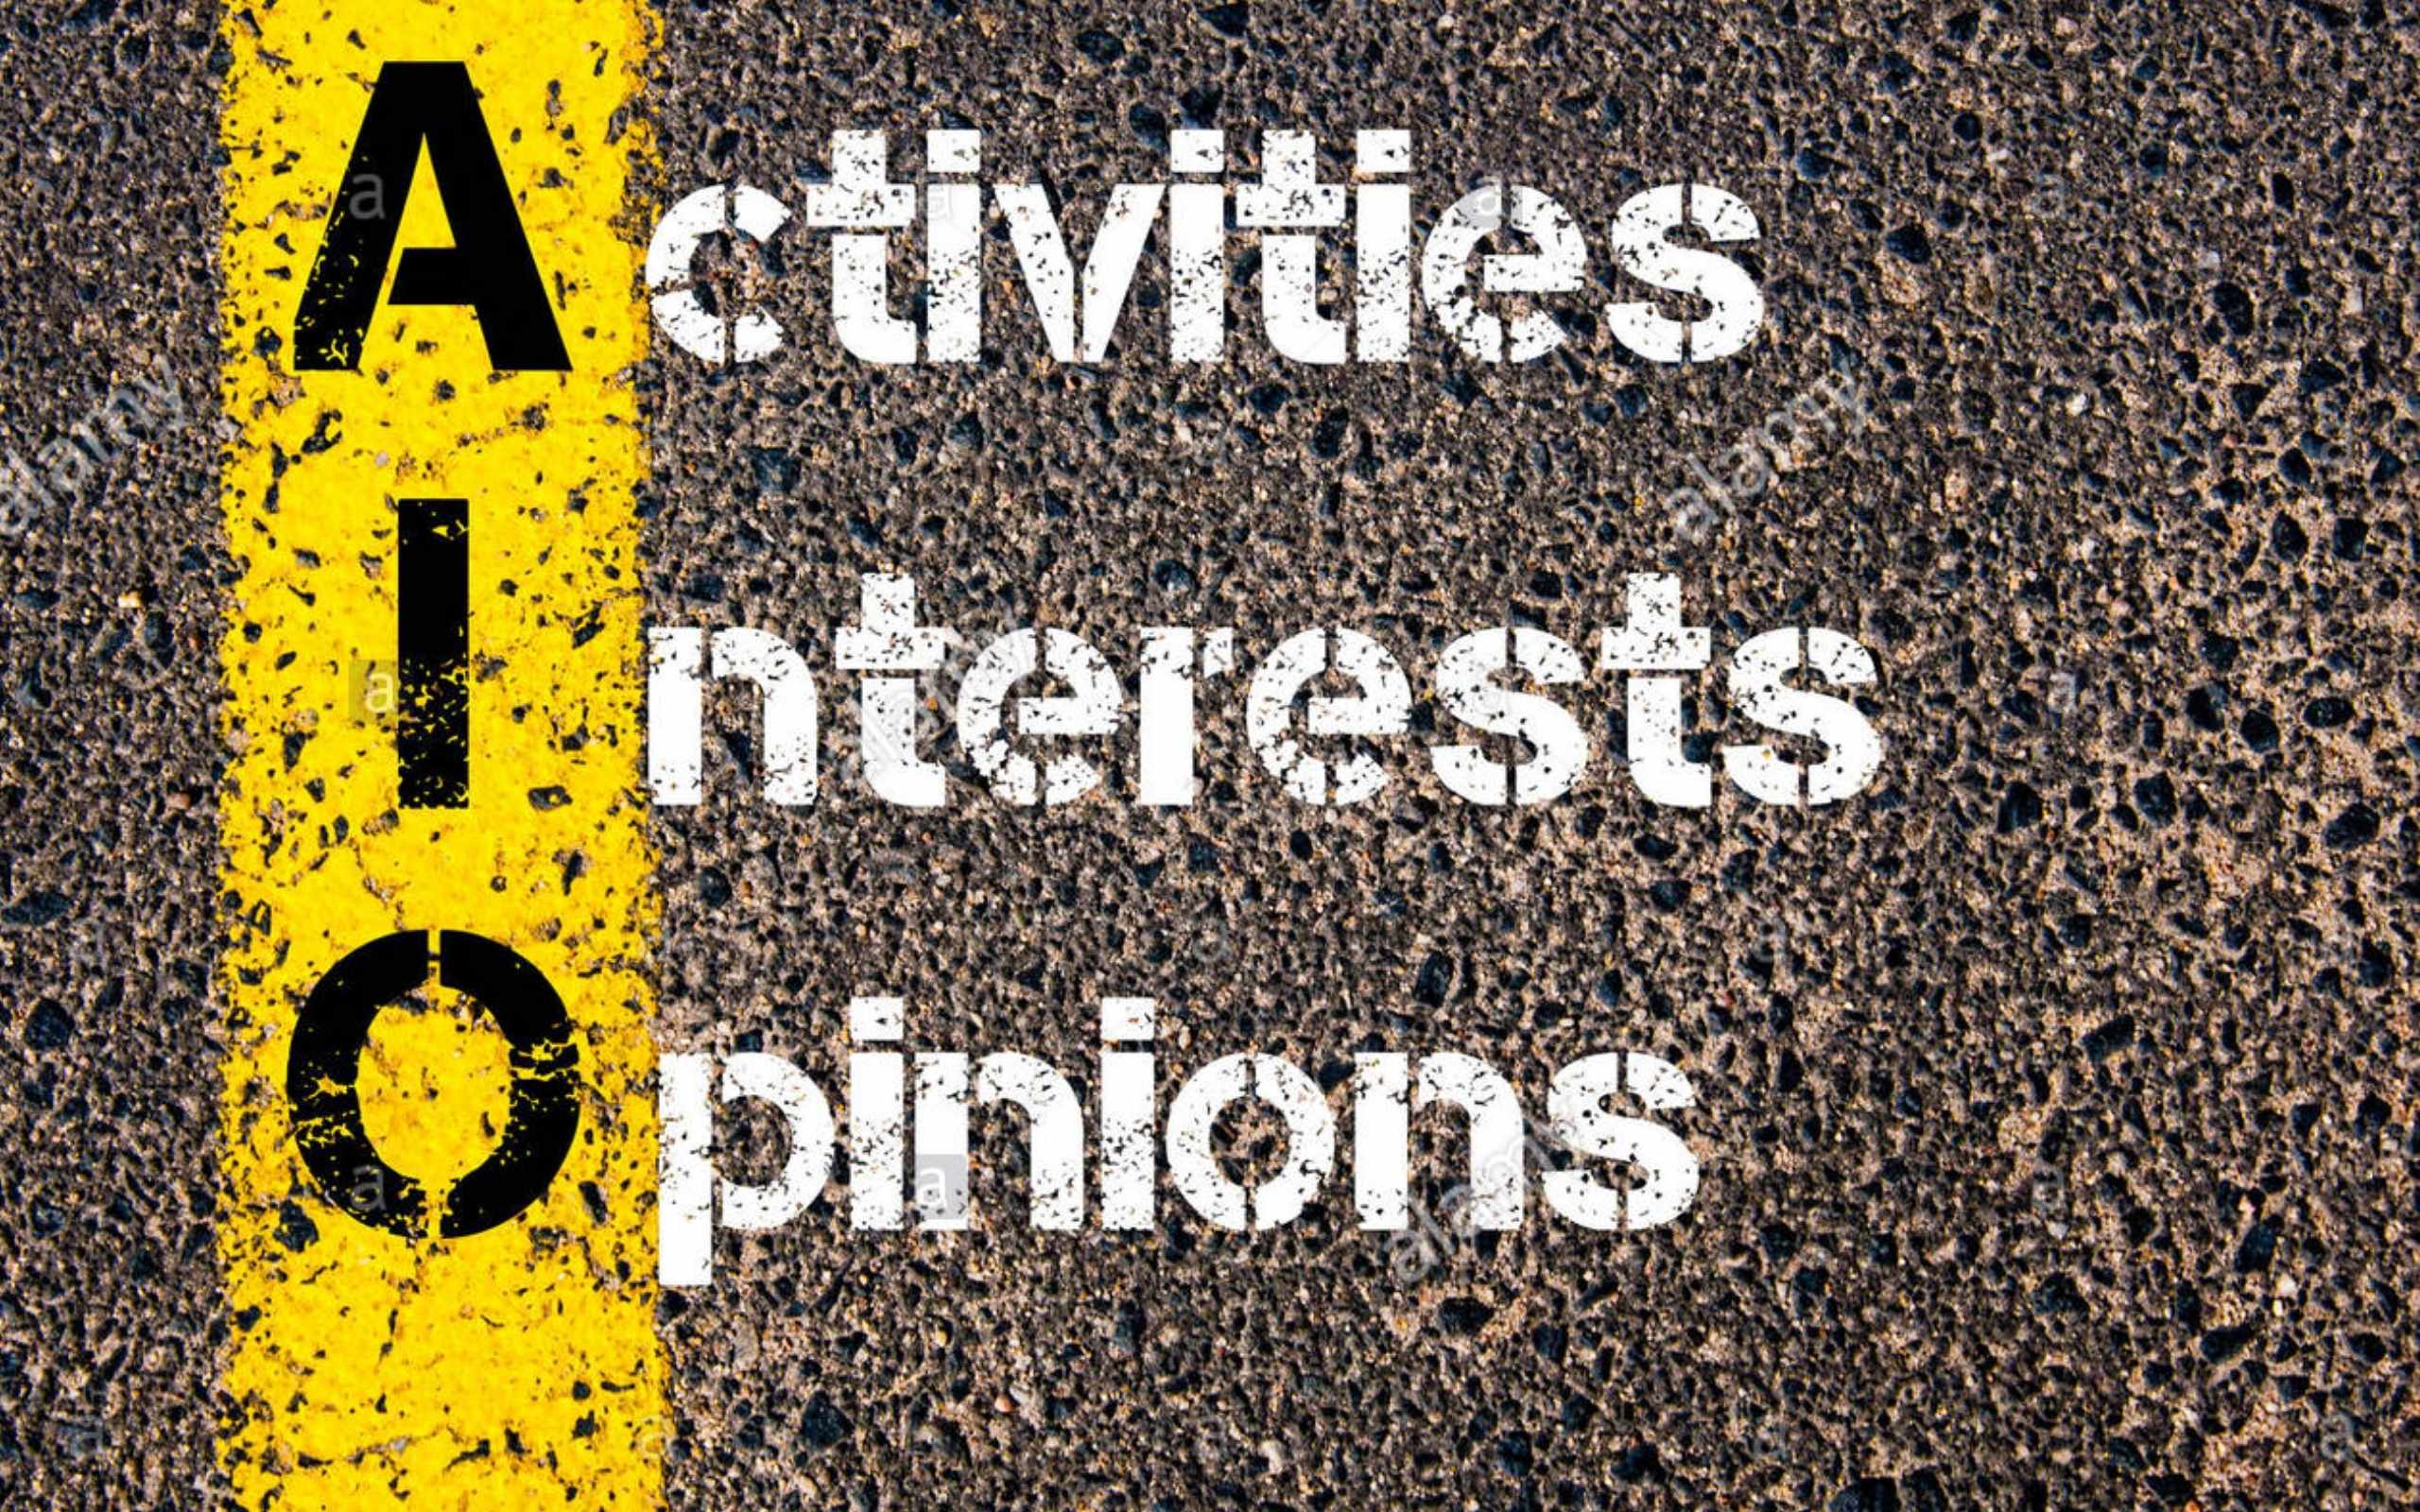 Activities, interests and opinions